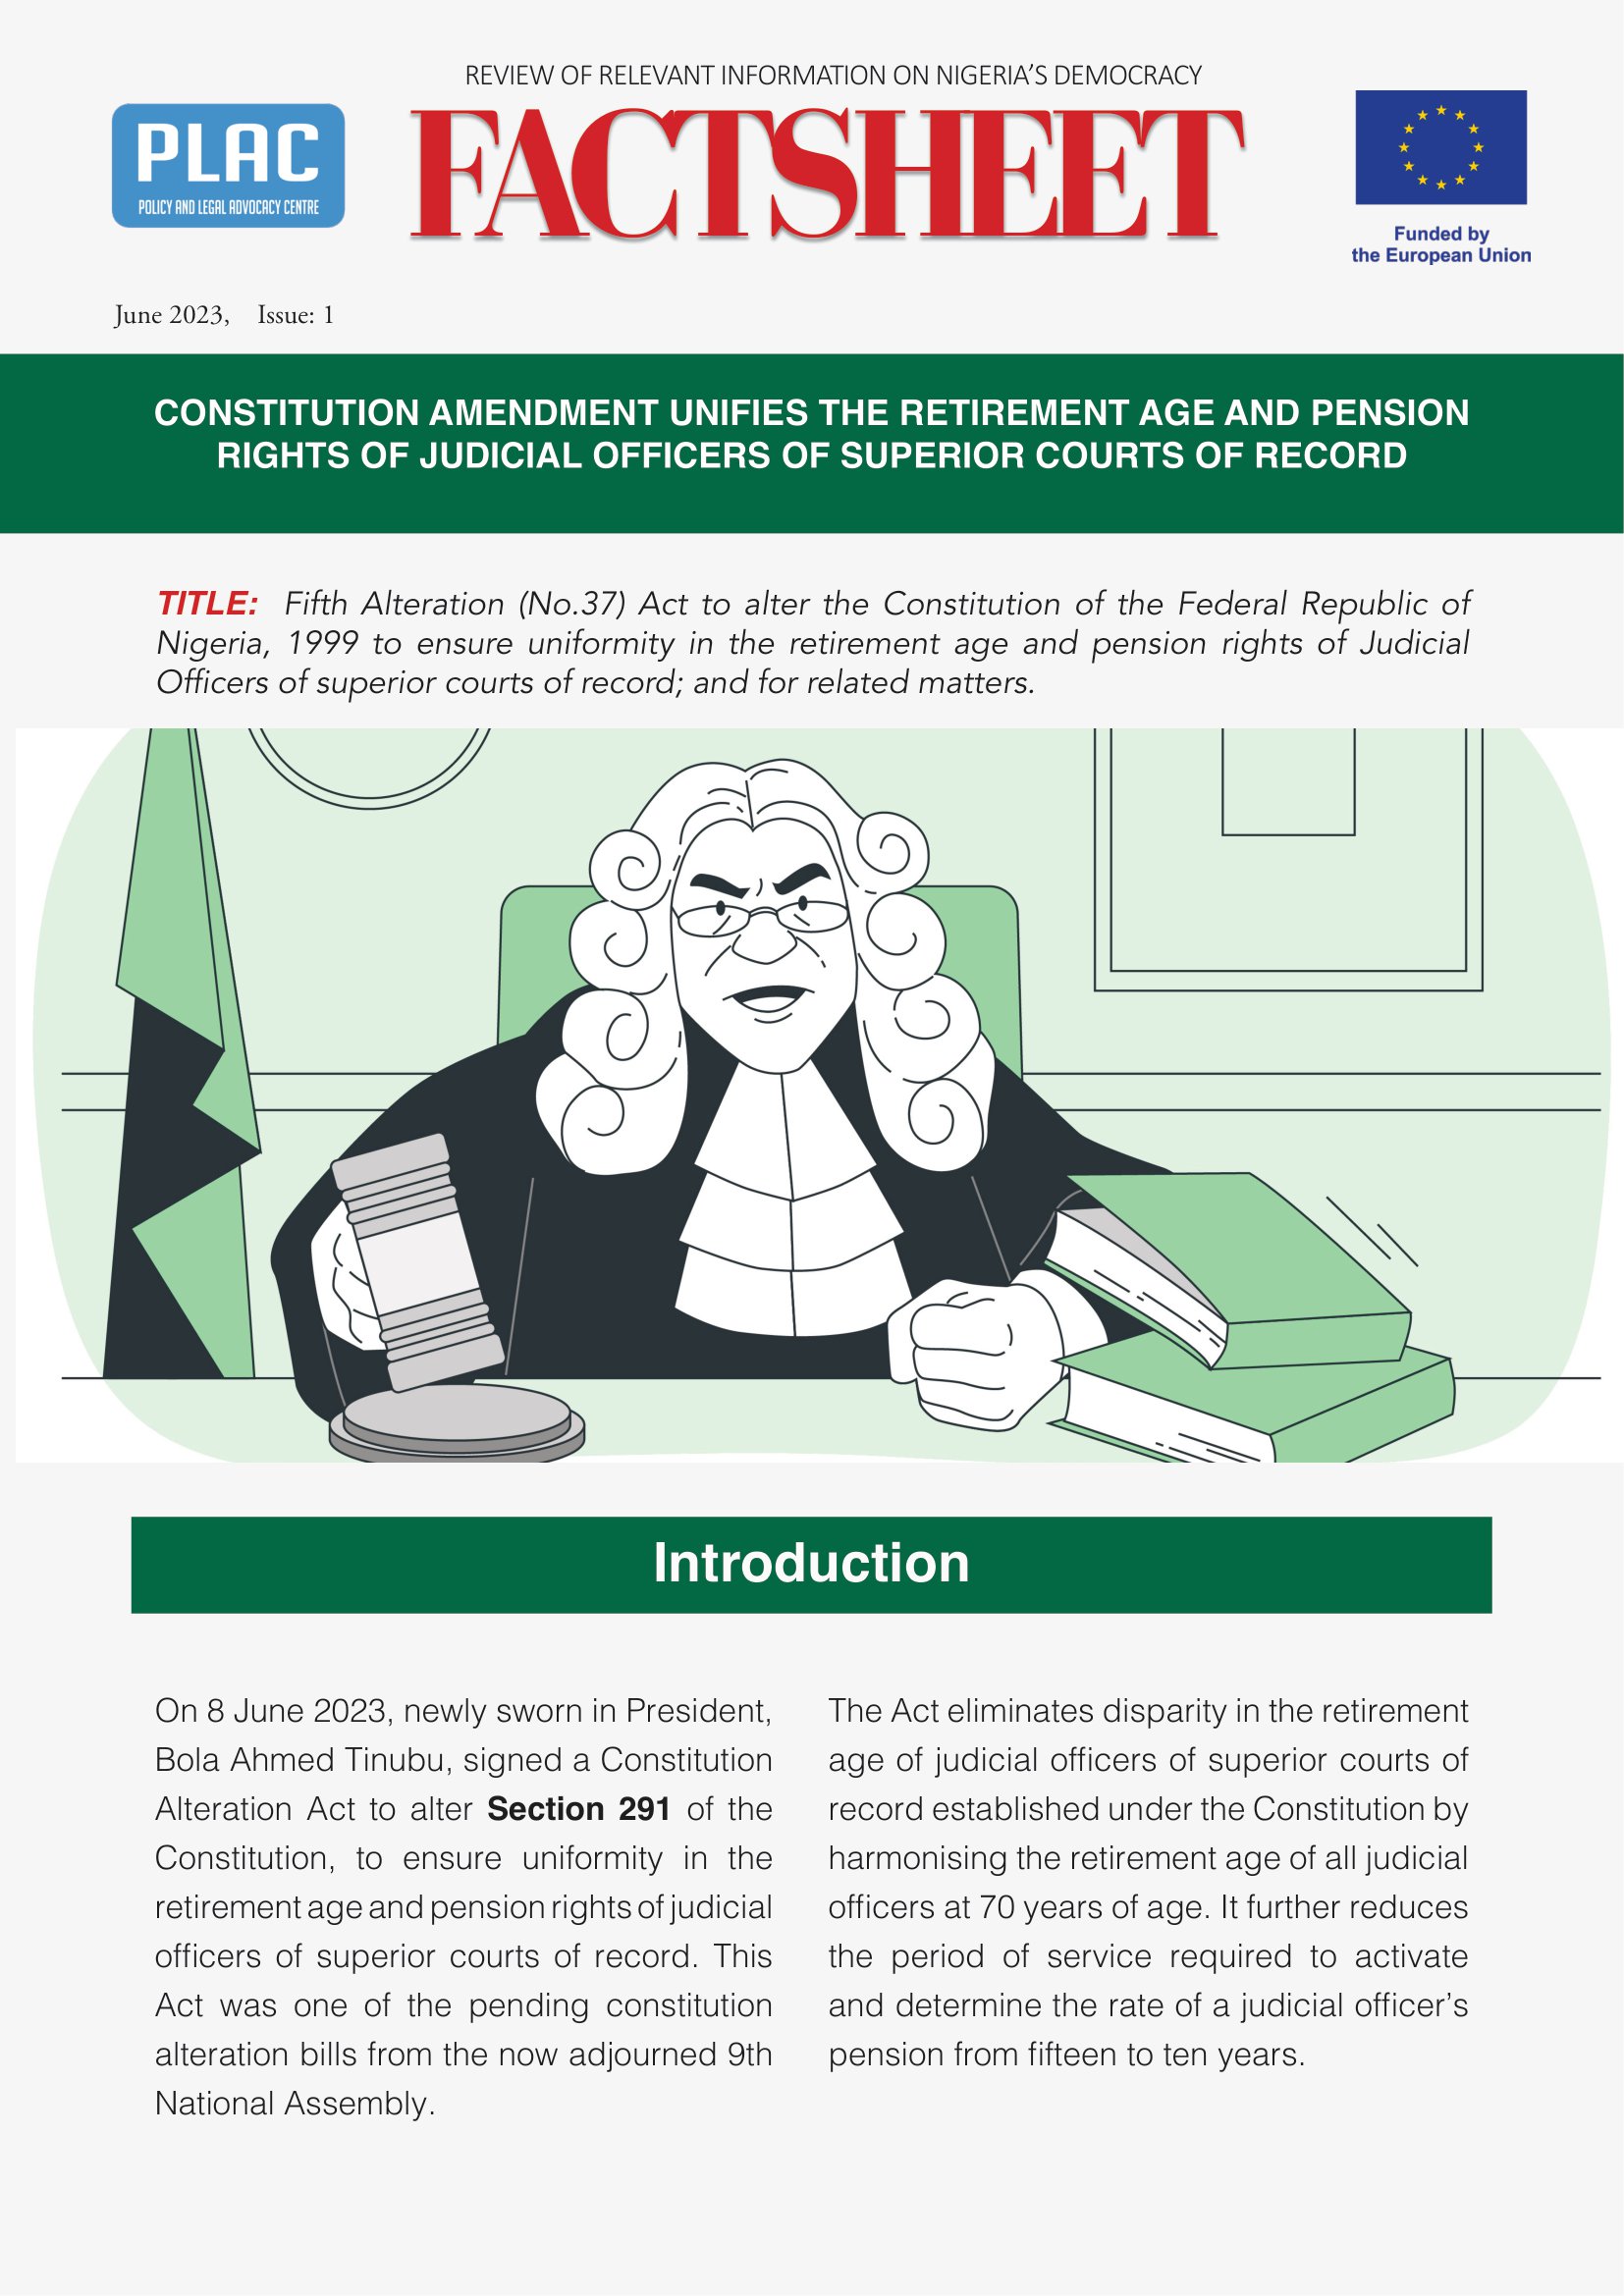 Constitution Amendment Unifies the Retirement Age and Pension Rights of Judicial Officers of Superior Courts of Record